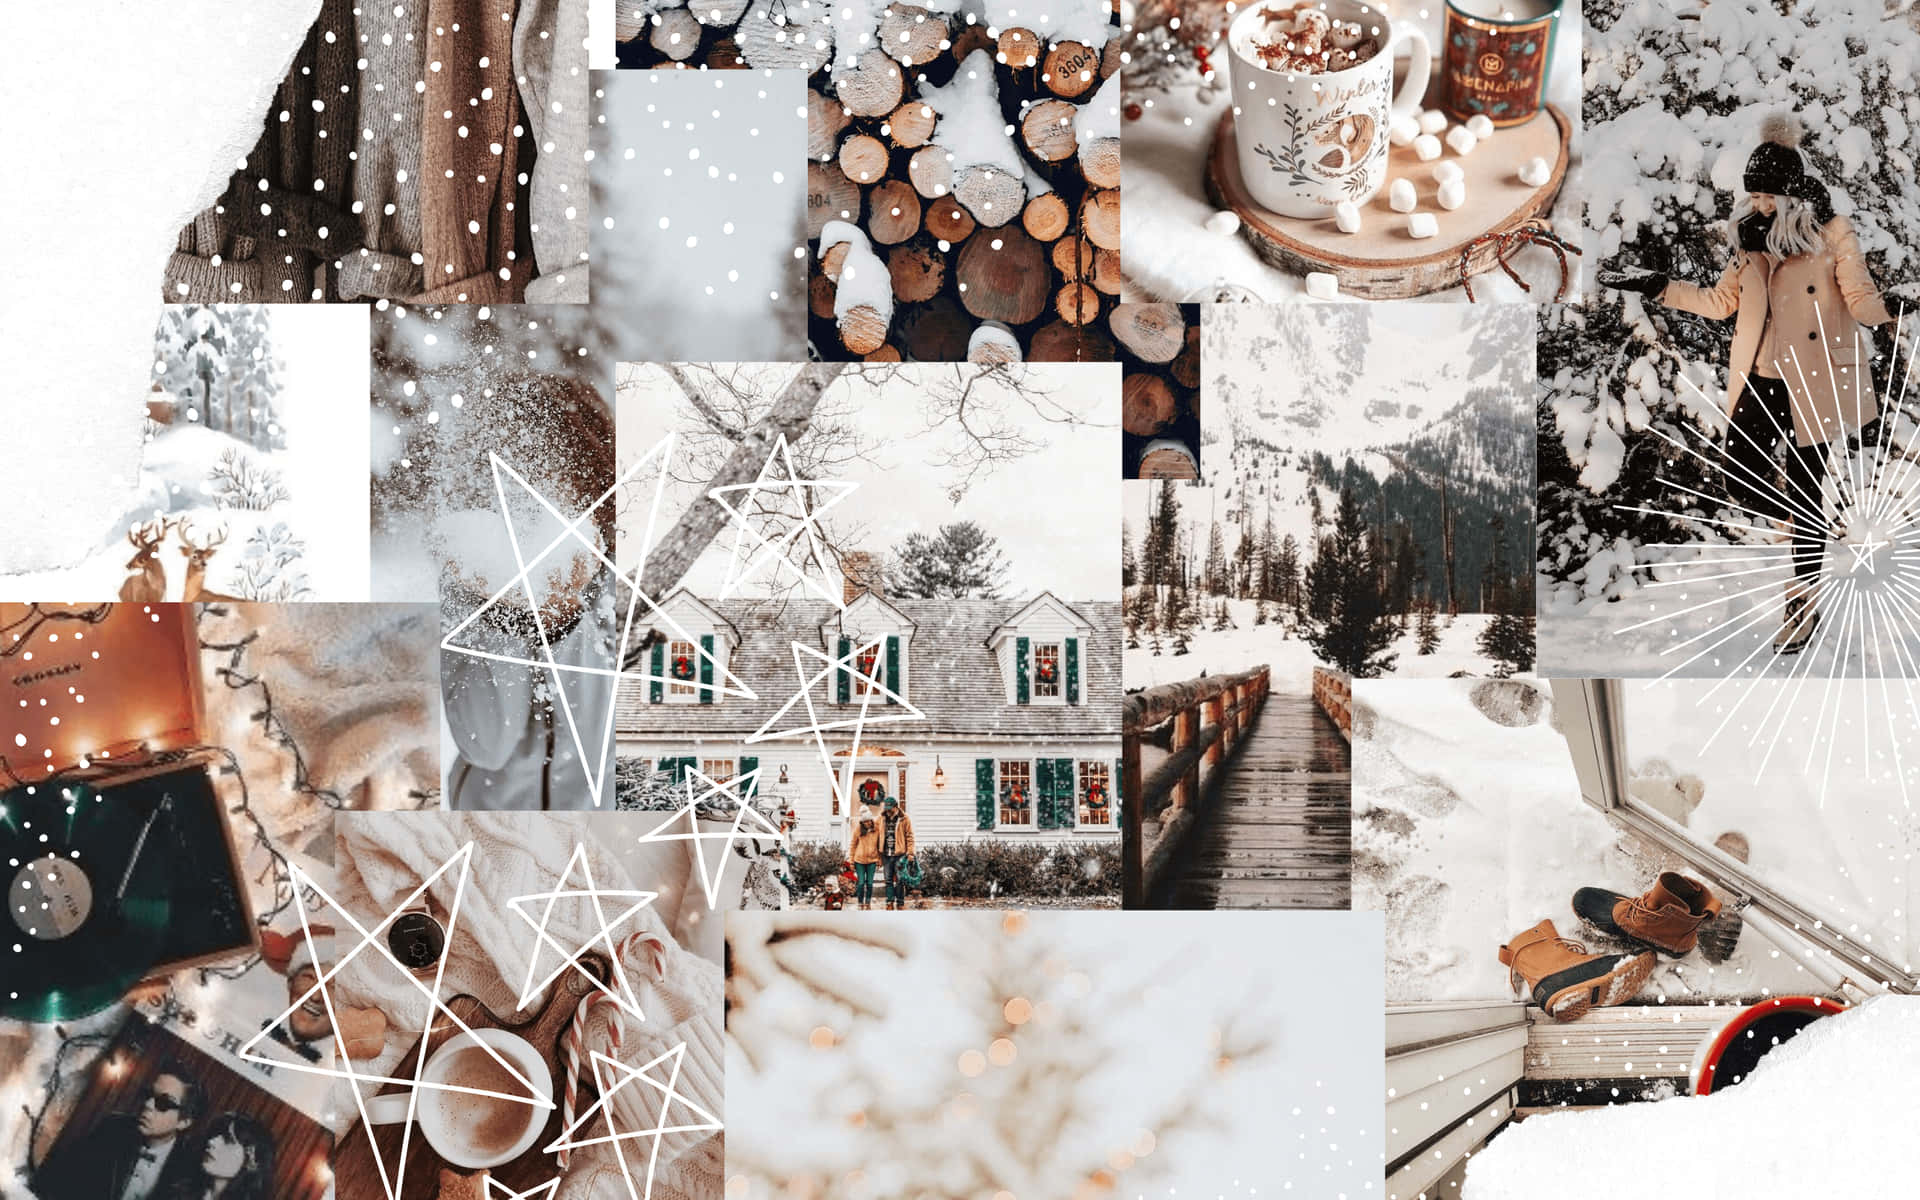 A Collage Of Photos With Snow And Snowflakes